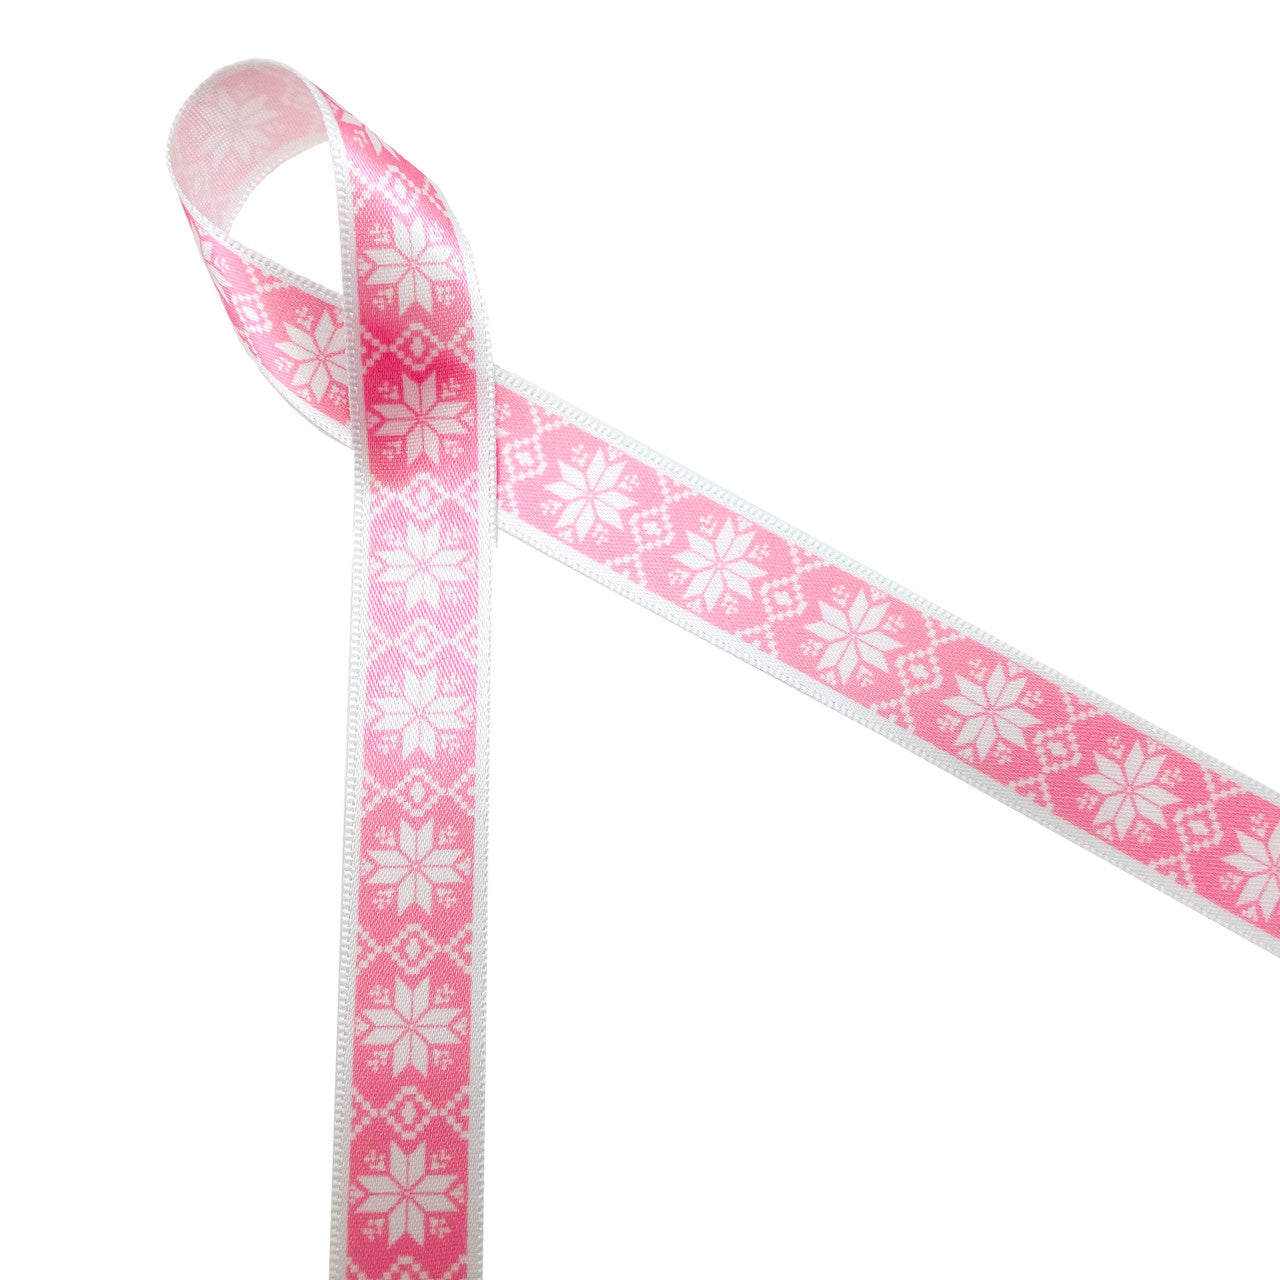 Nordic design snowflakes on a pink background printed on 5/8" white single face satin  ribbon is an ideal ribbon for Holiday and Winter themed gifts, parties and favors. Tie this ribbon on cookies, cake pops and candy treats to make a sweets table a Winter Wonderland! All our ribbons are designed and printed in the USA